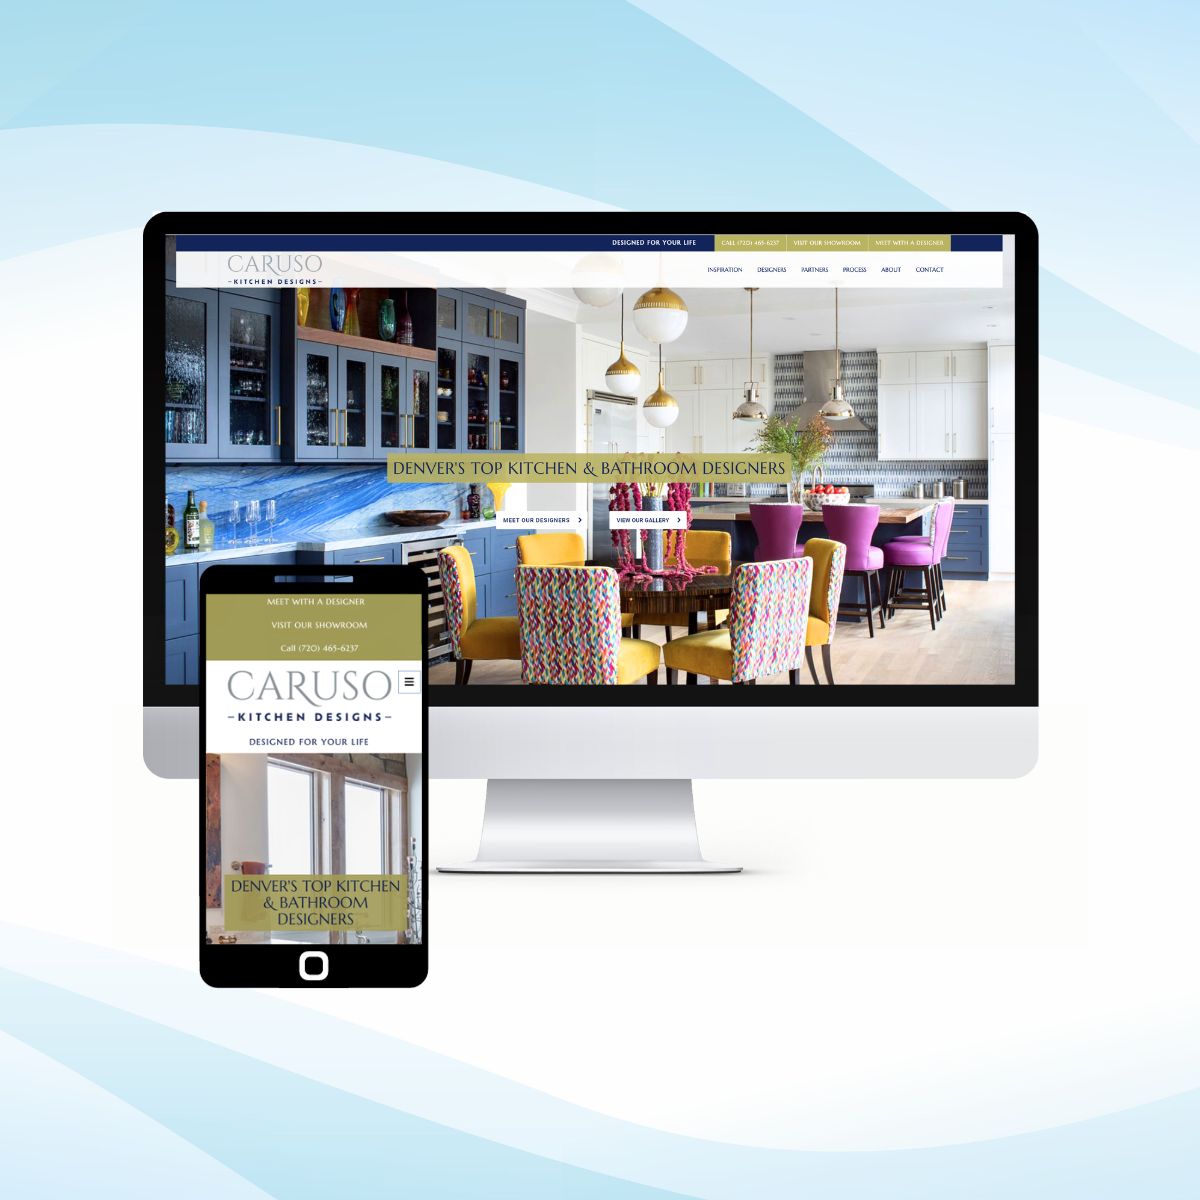 10 Key Elements of a Remodeling Company's Website Design